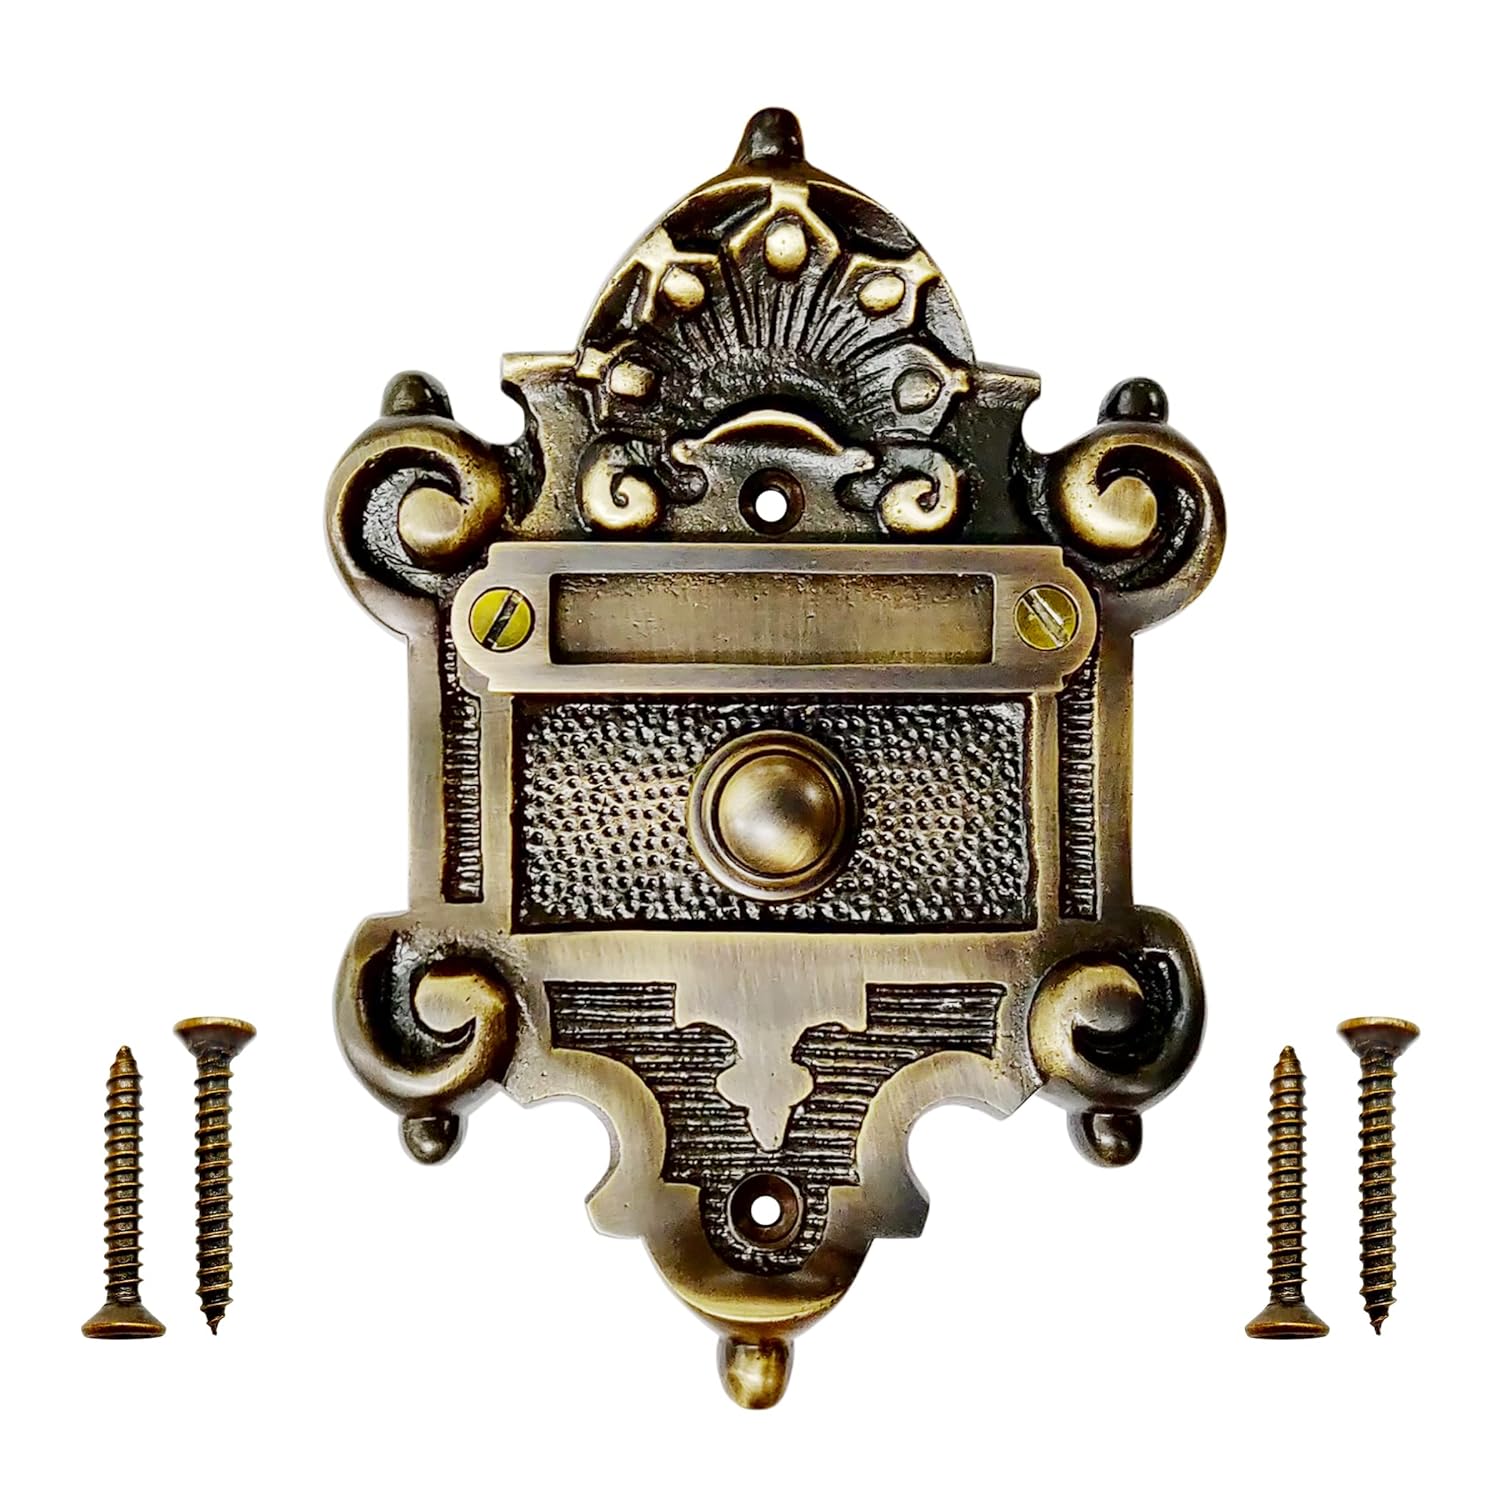 Akatva Decorative Doorbell Button – Finest Quality Bell Push Button – Easy to Install Calling Bell Button – Vintage Décor Doorbell Button Finely Hand Crafted - Antique Brass Finish